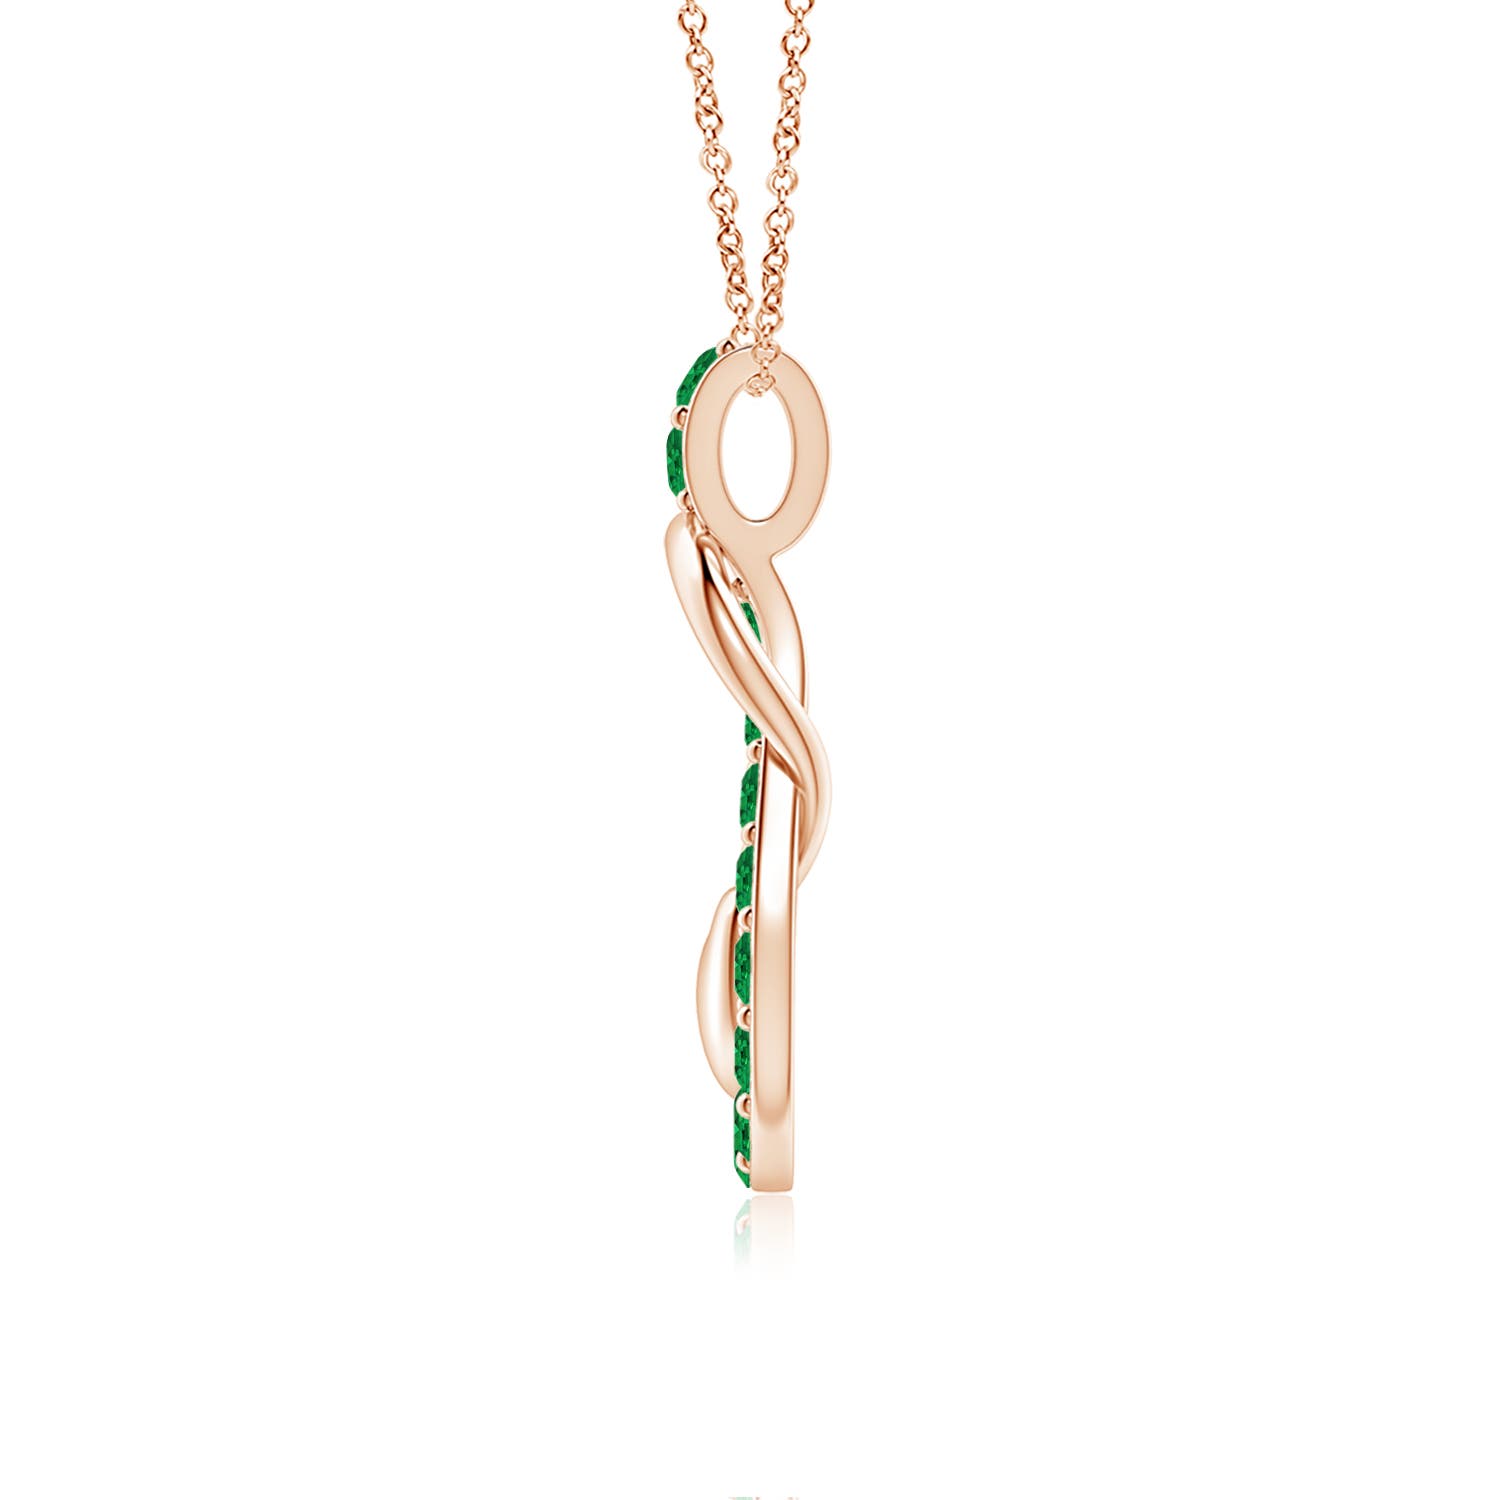 AAA - Emerald / 1.2 CT / 14 KT Rose Gold